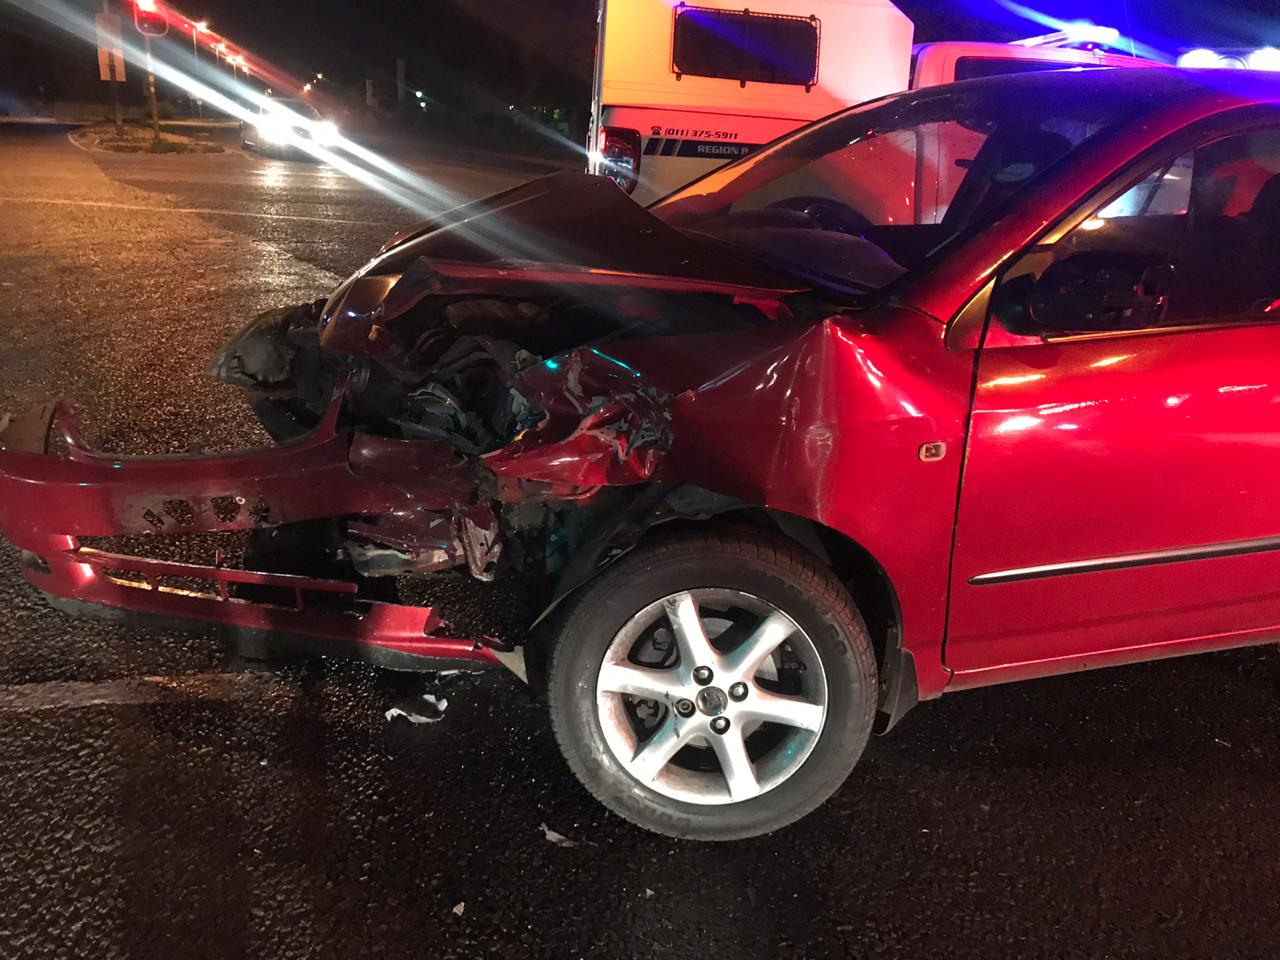 One injured in a collision at an intersection in Randburg